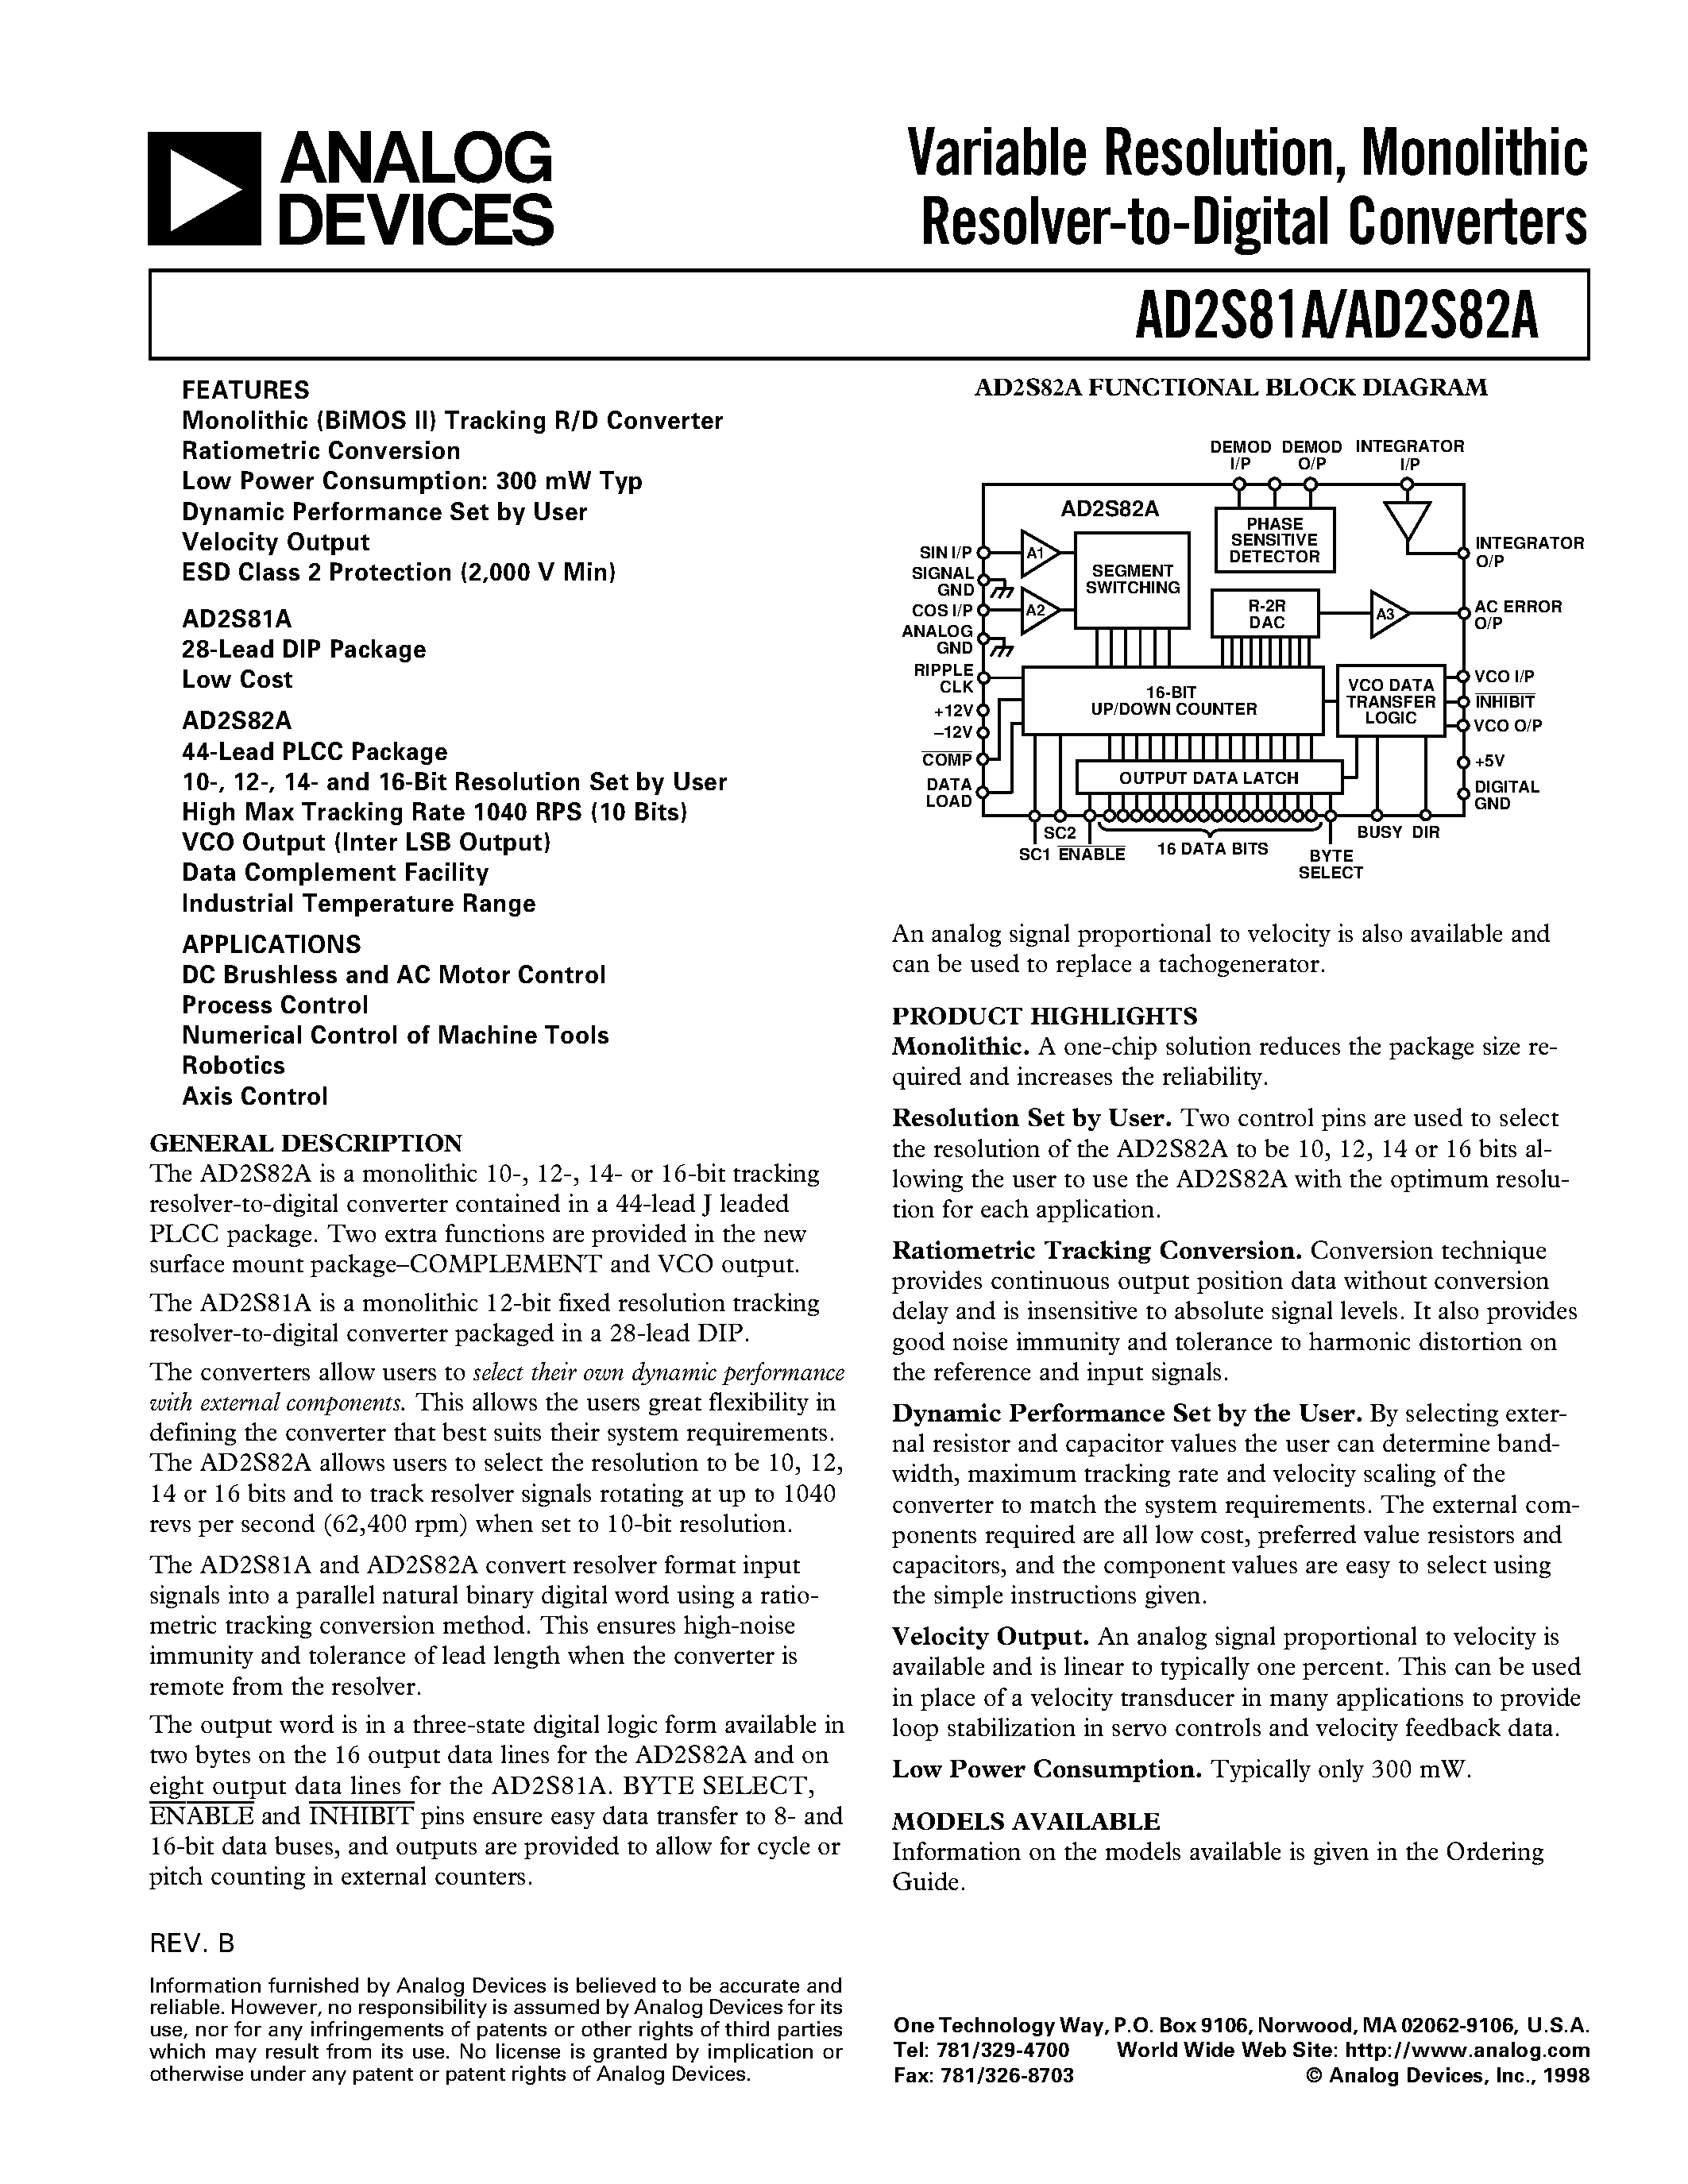 Даташит AD2S81A - Variable Resolution/ Monolithic Resolver-to-Digital Converters страница 1